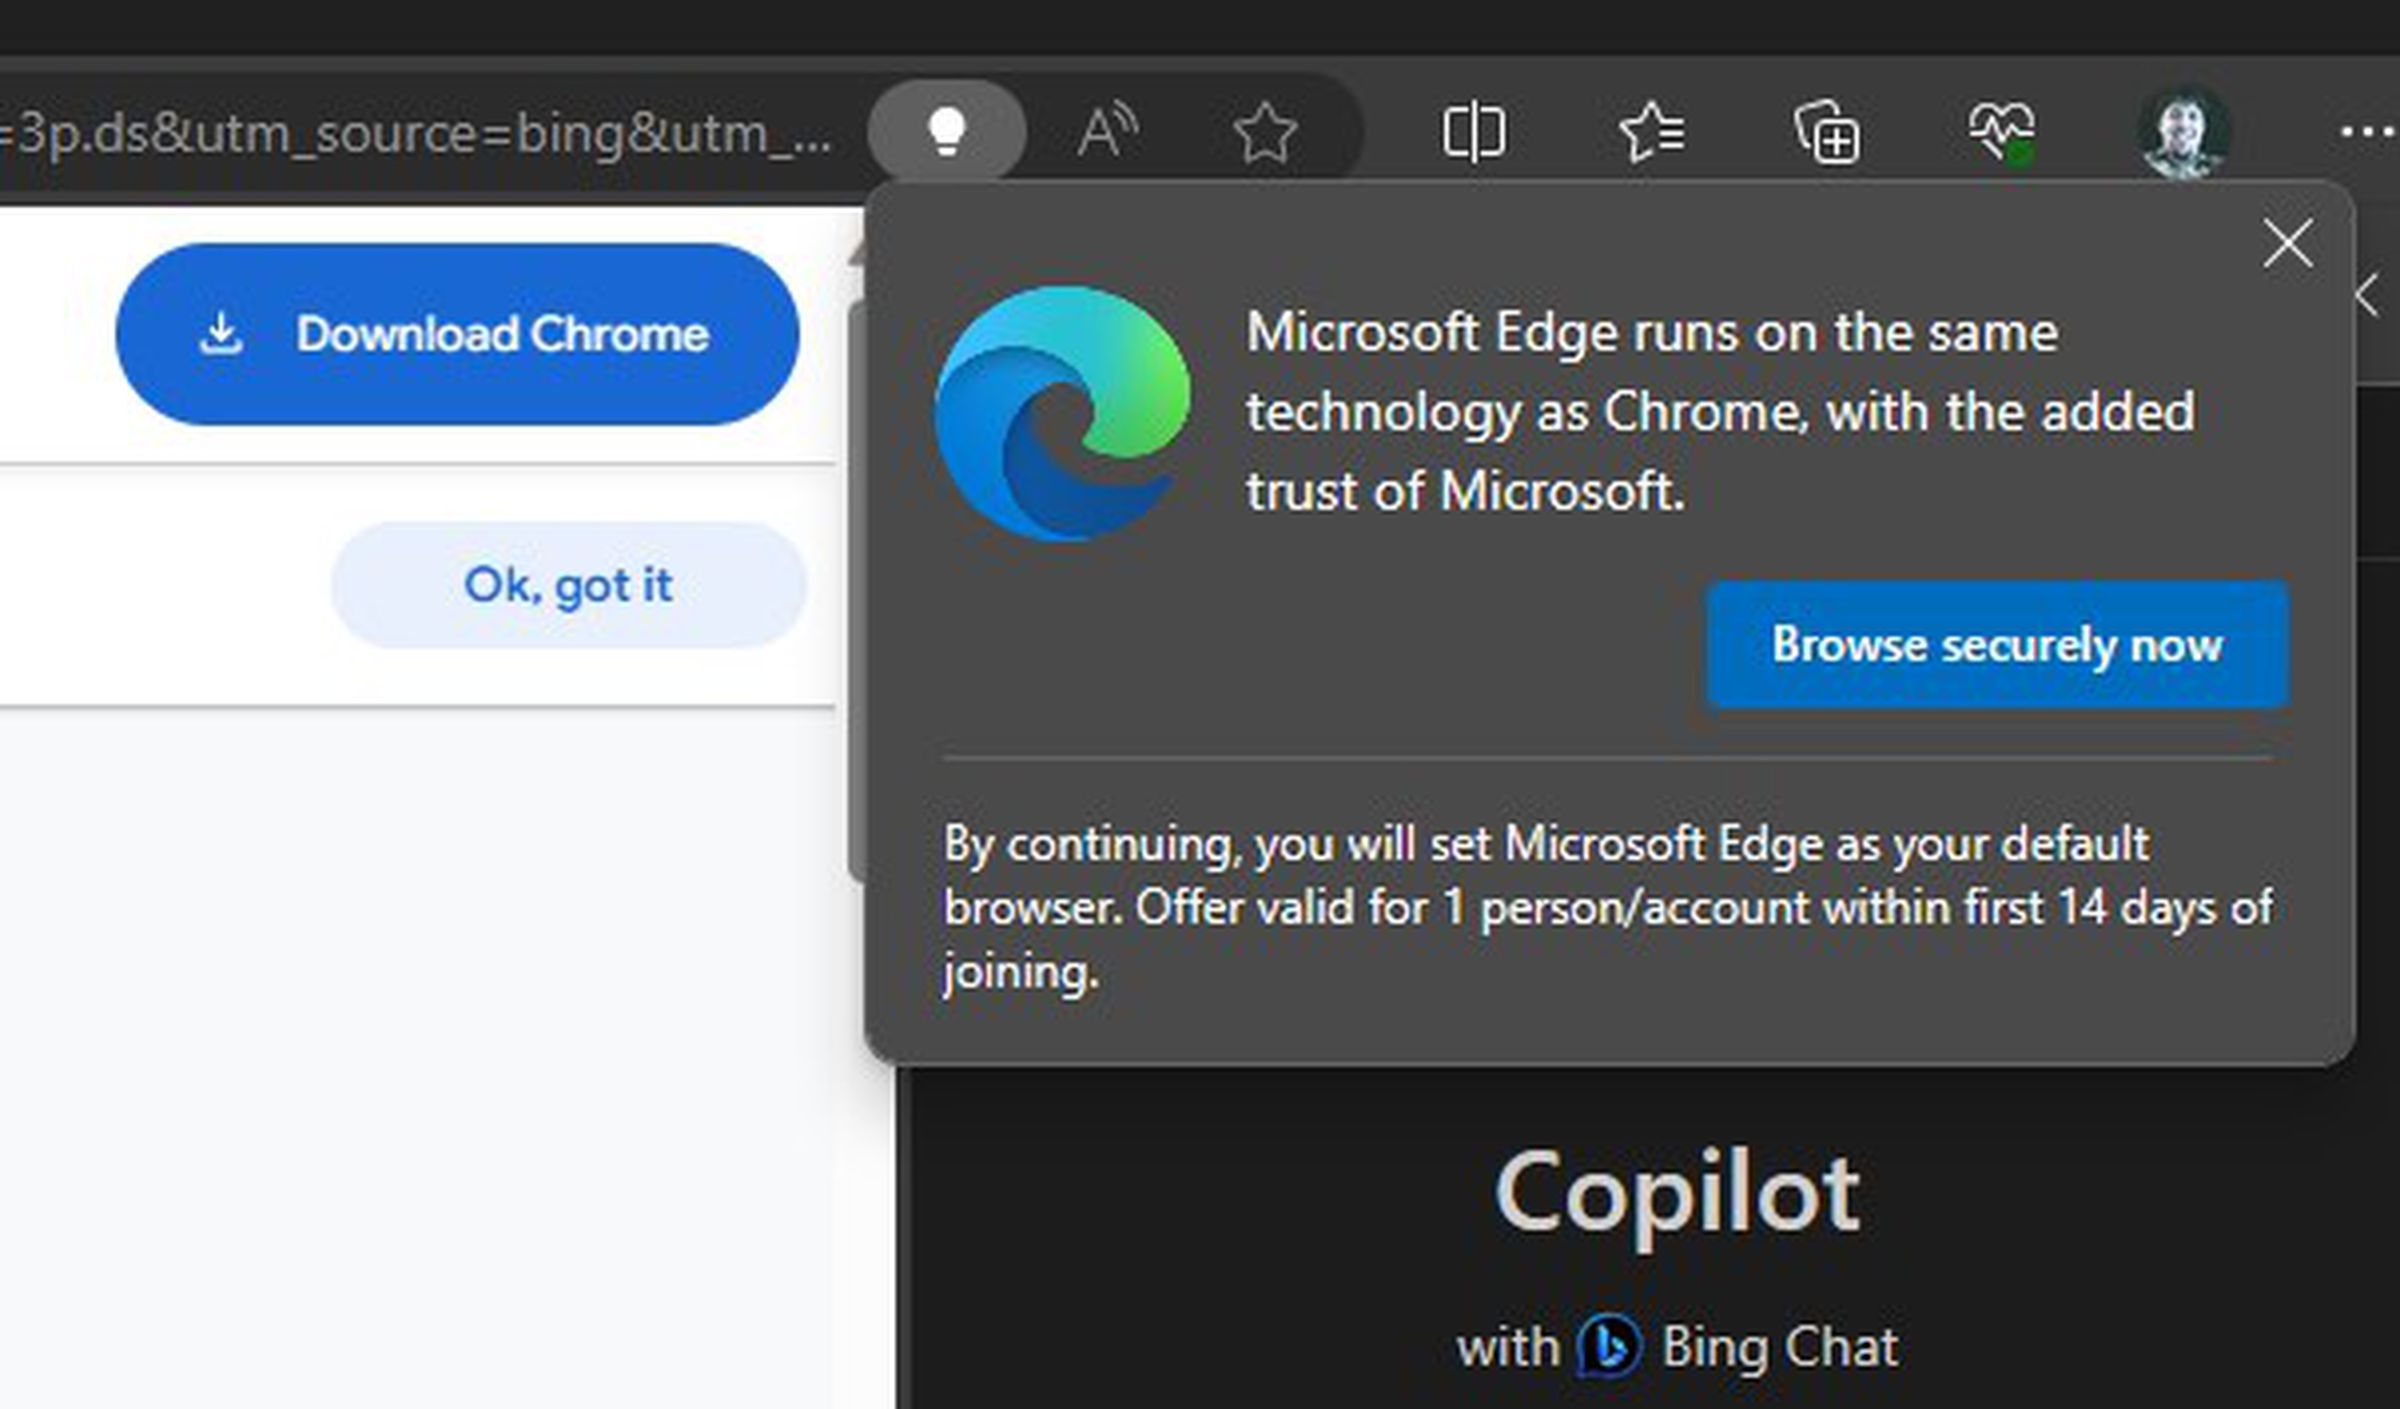 “Microsoft edge runs on the same technology as Chrome, with the added trust of Microsoft,” reads a pop-up that appears after you land on Google’s site.